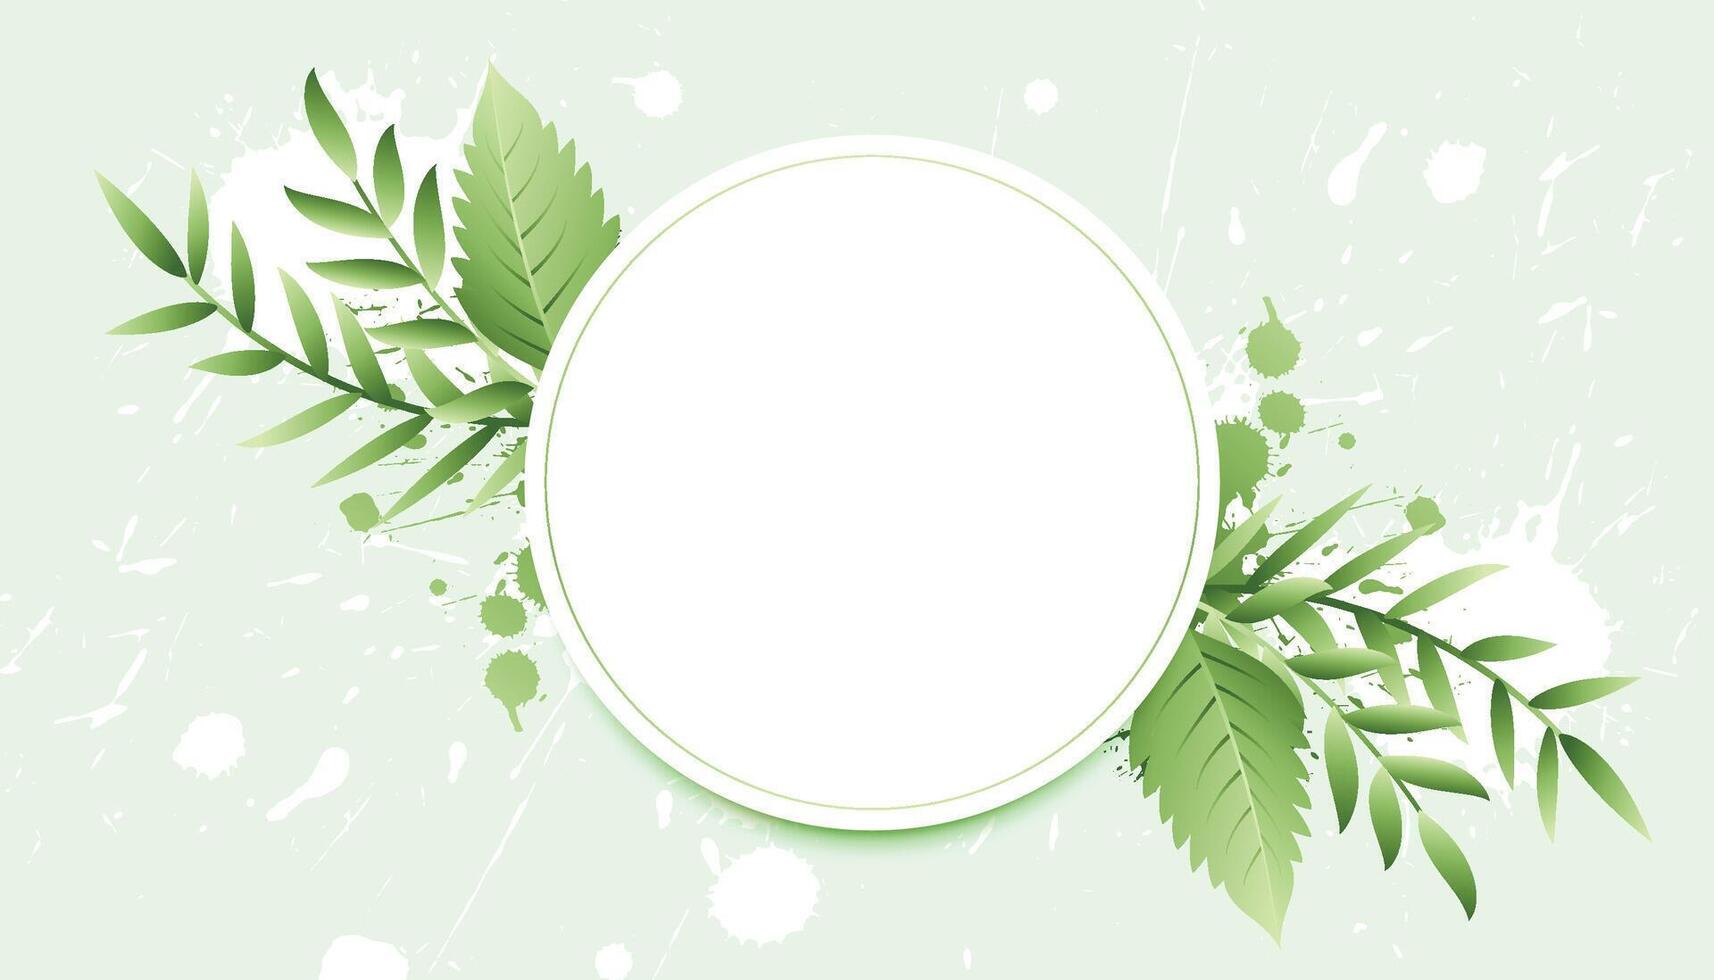 Herbal minimalist frames. Hand painted plants, branches, leaves on a white background. Greenery wedding simple invitation template. Watercolor style card. All elements are isolated and editable vector